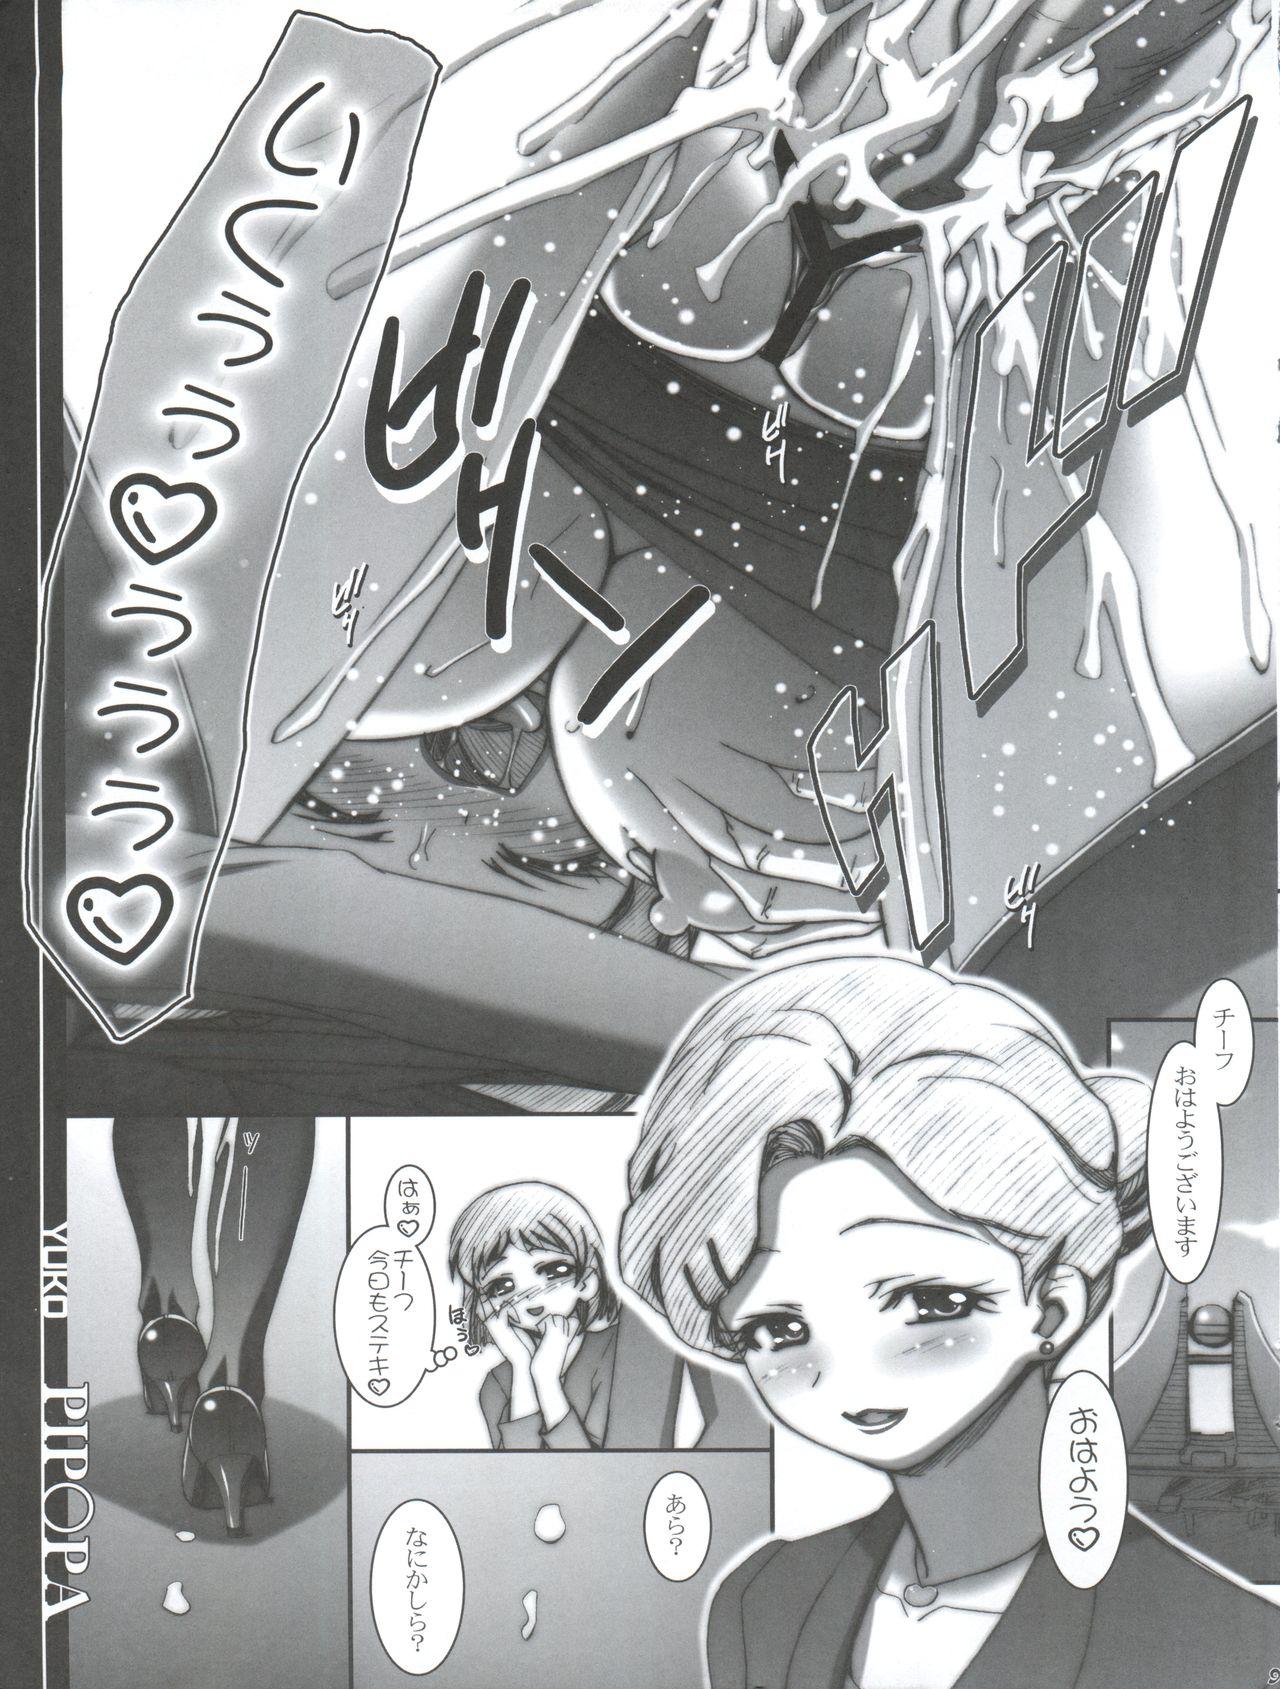 Beauty BBS NOTE 2008 SUMMER - Yes precure 5 Net ghost pipopa Teenage Girl Porn - Page 9